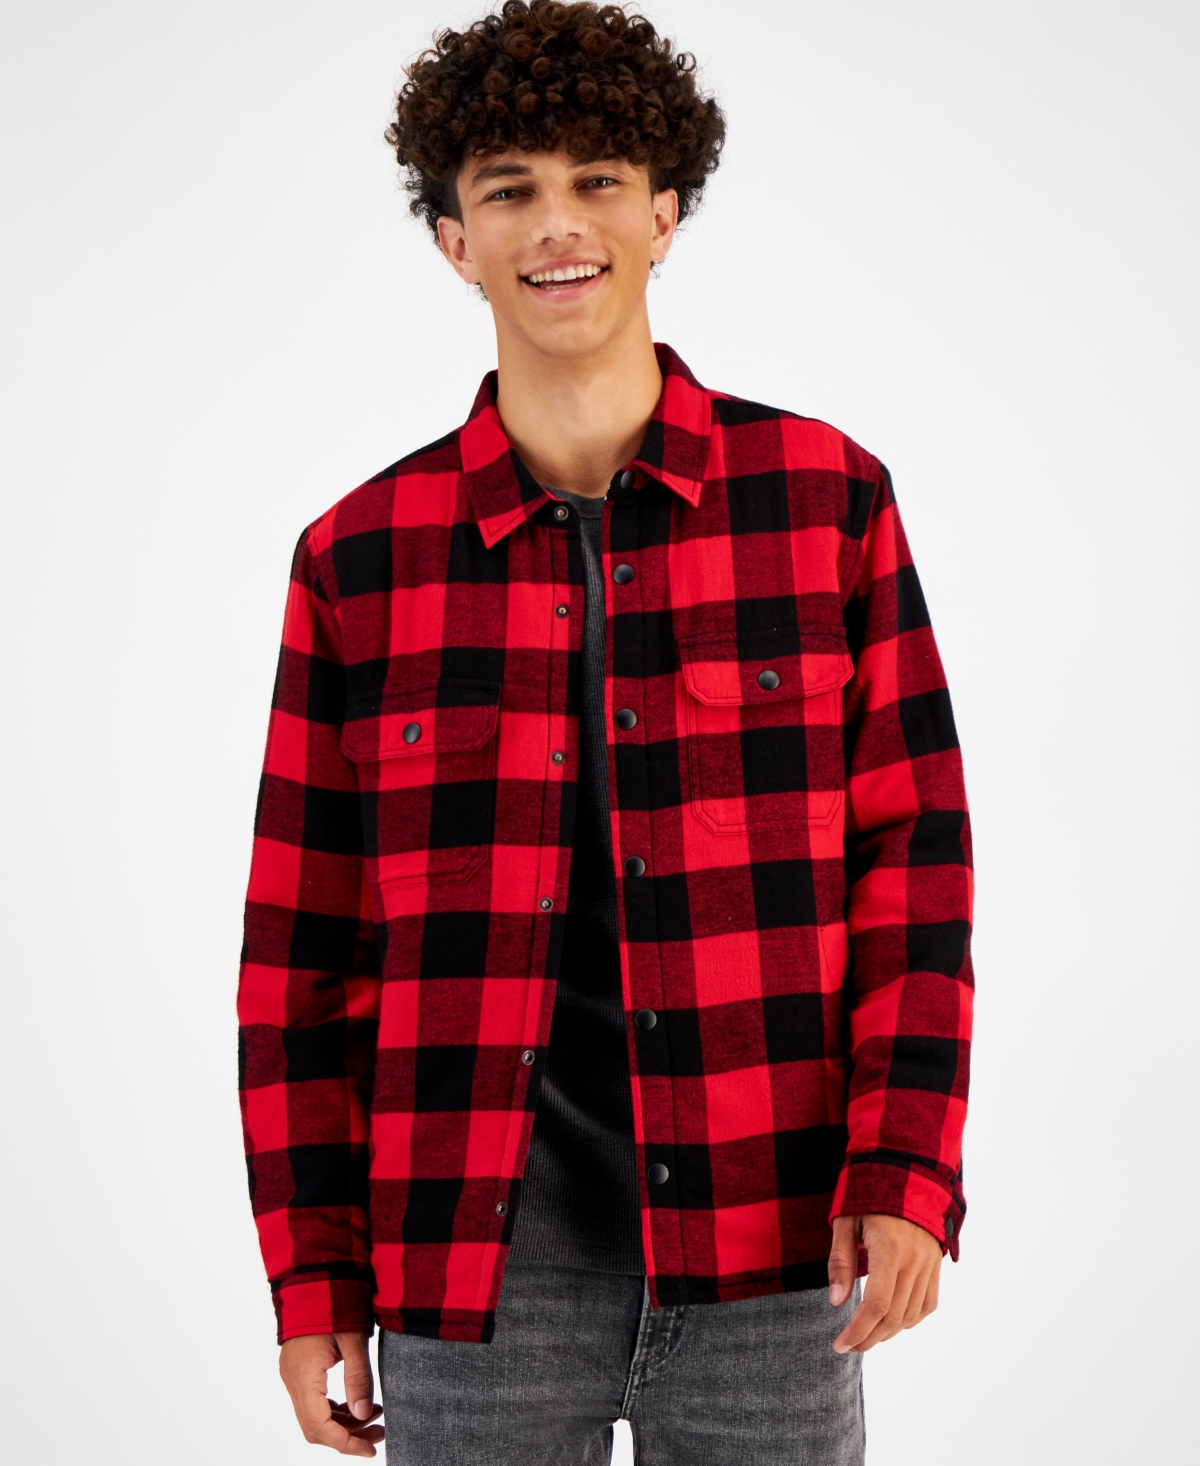 Sun + Stone Men's Carter Plaid Shirt Jacket, Created For Macy's In All Star Red